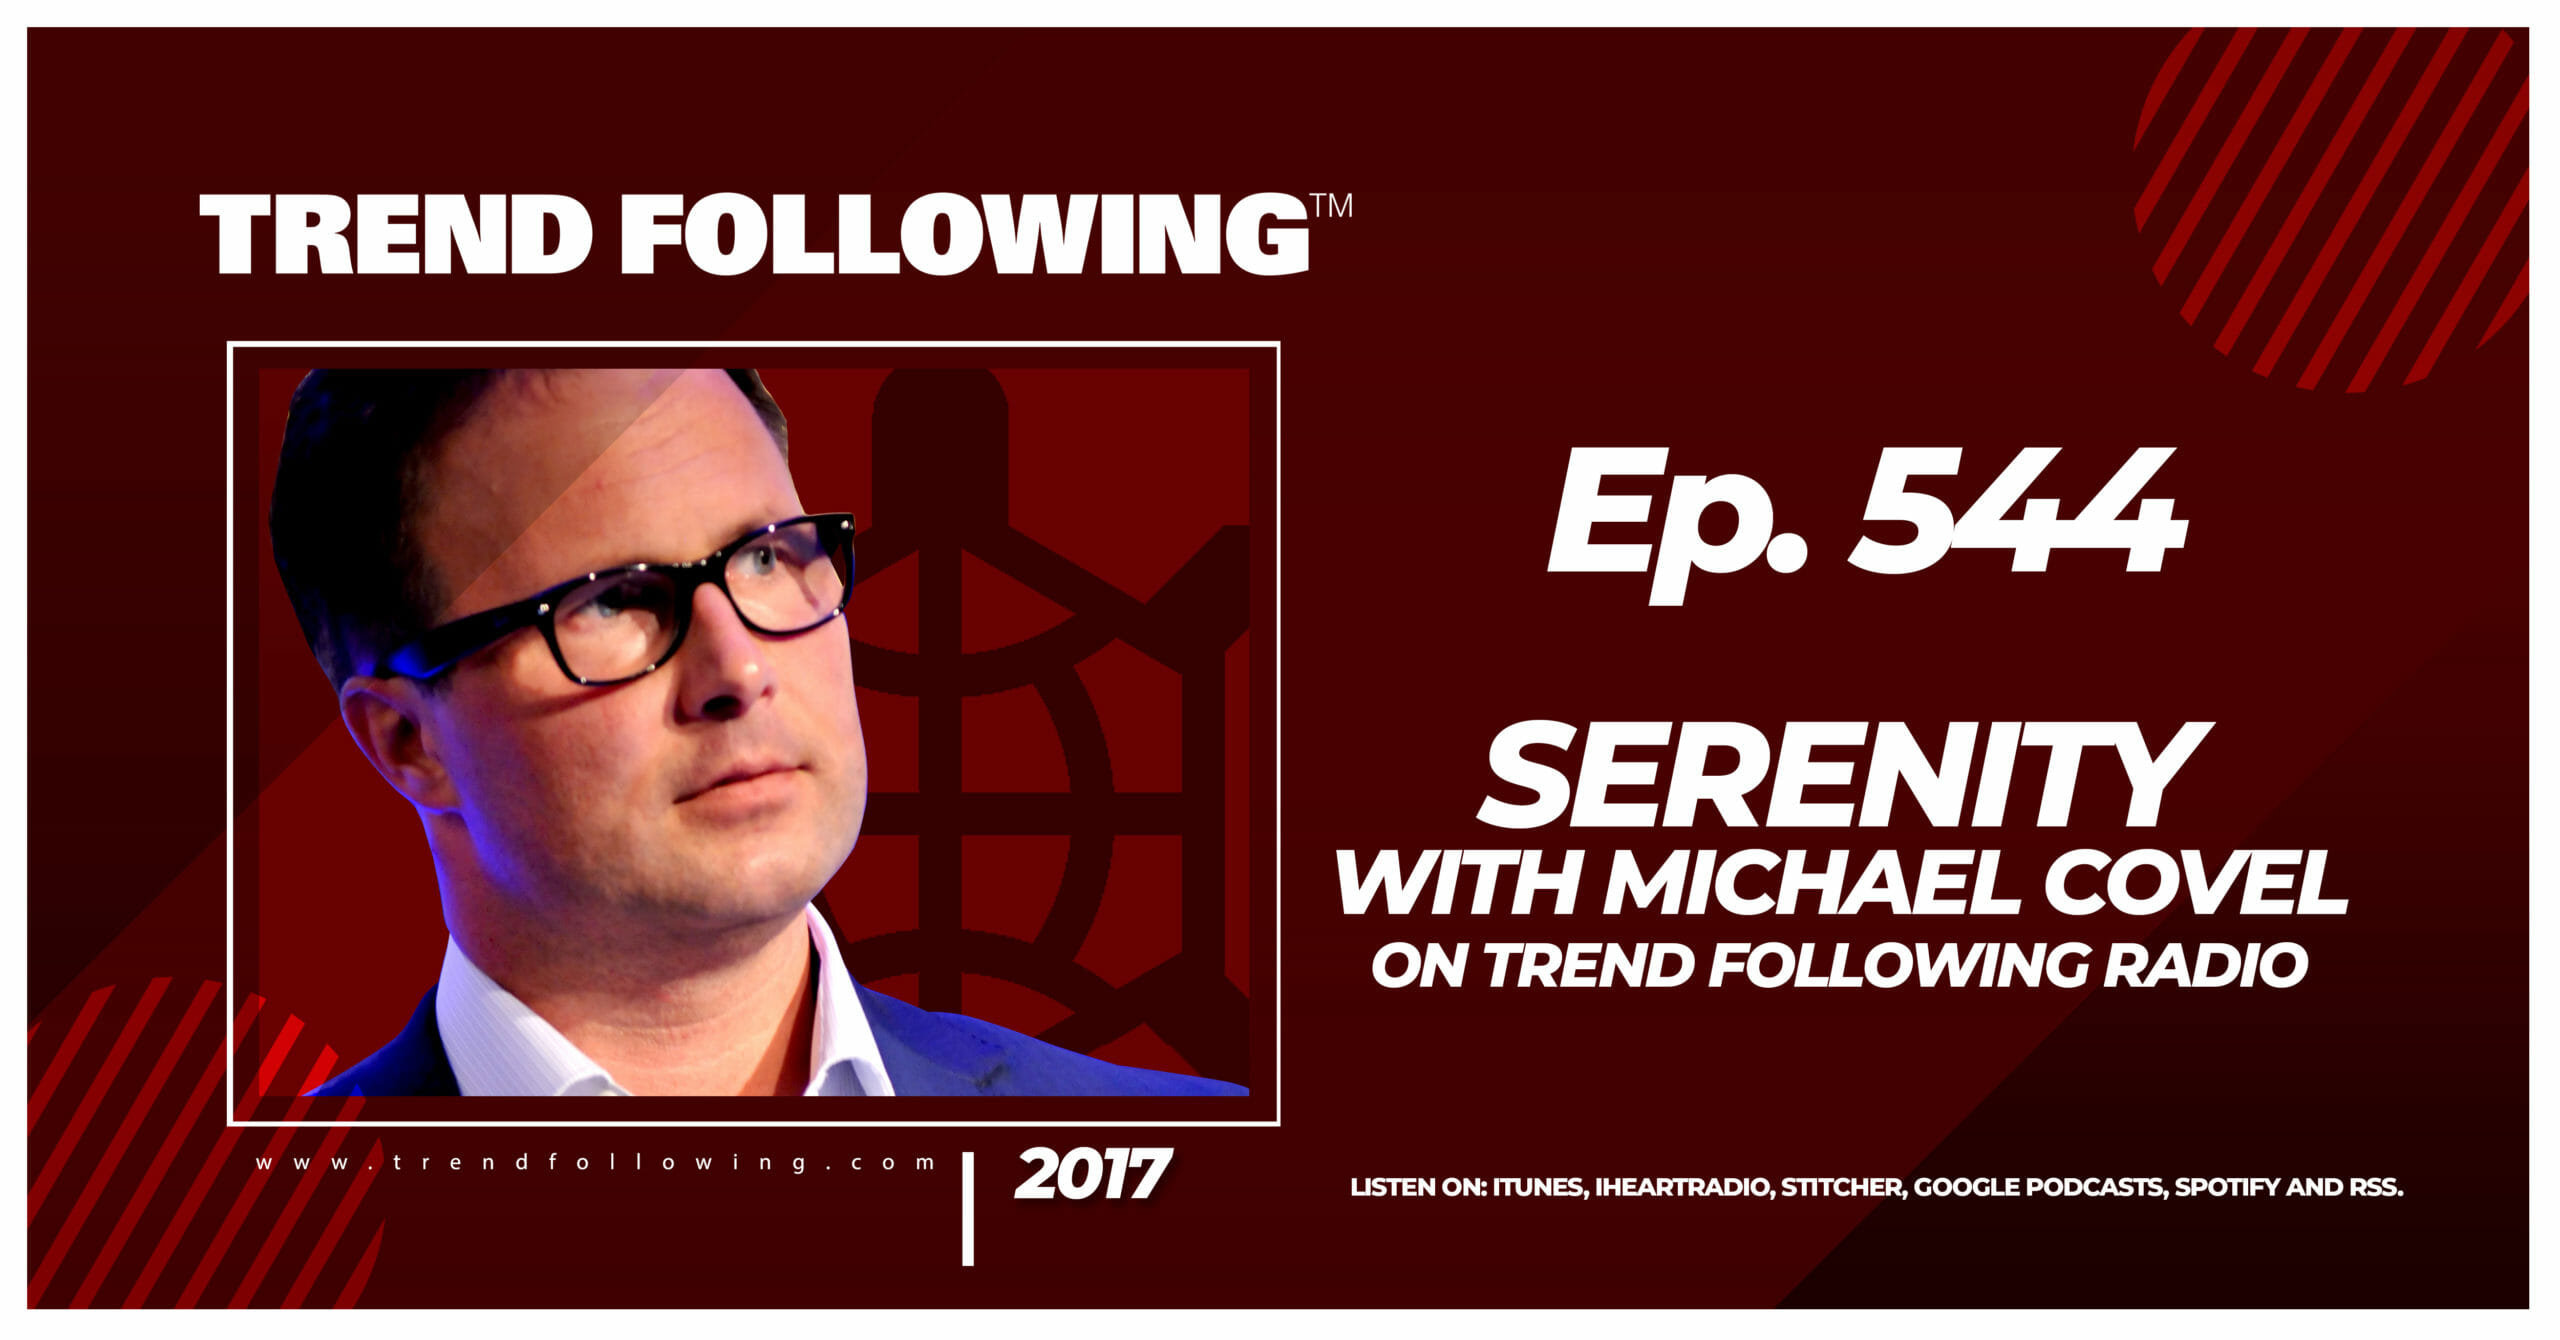 Serenity with Michael Covel on Trend Following Radio